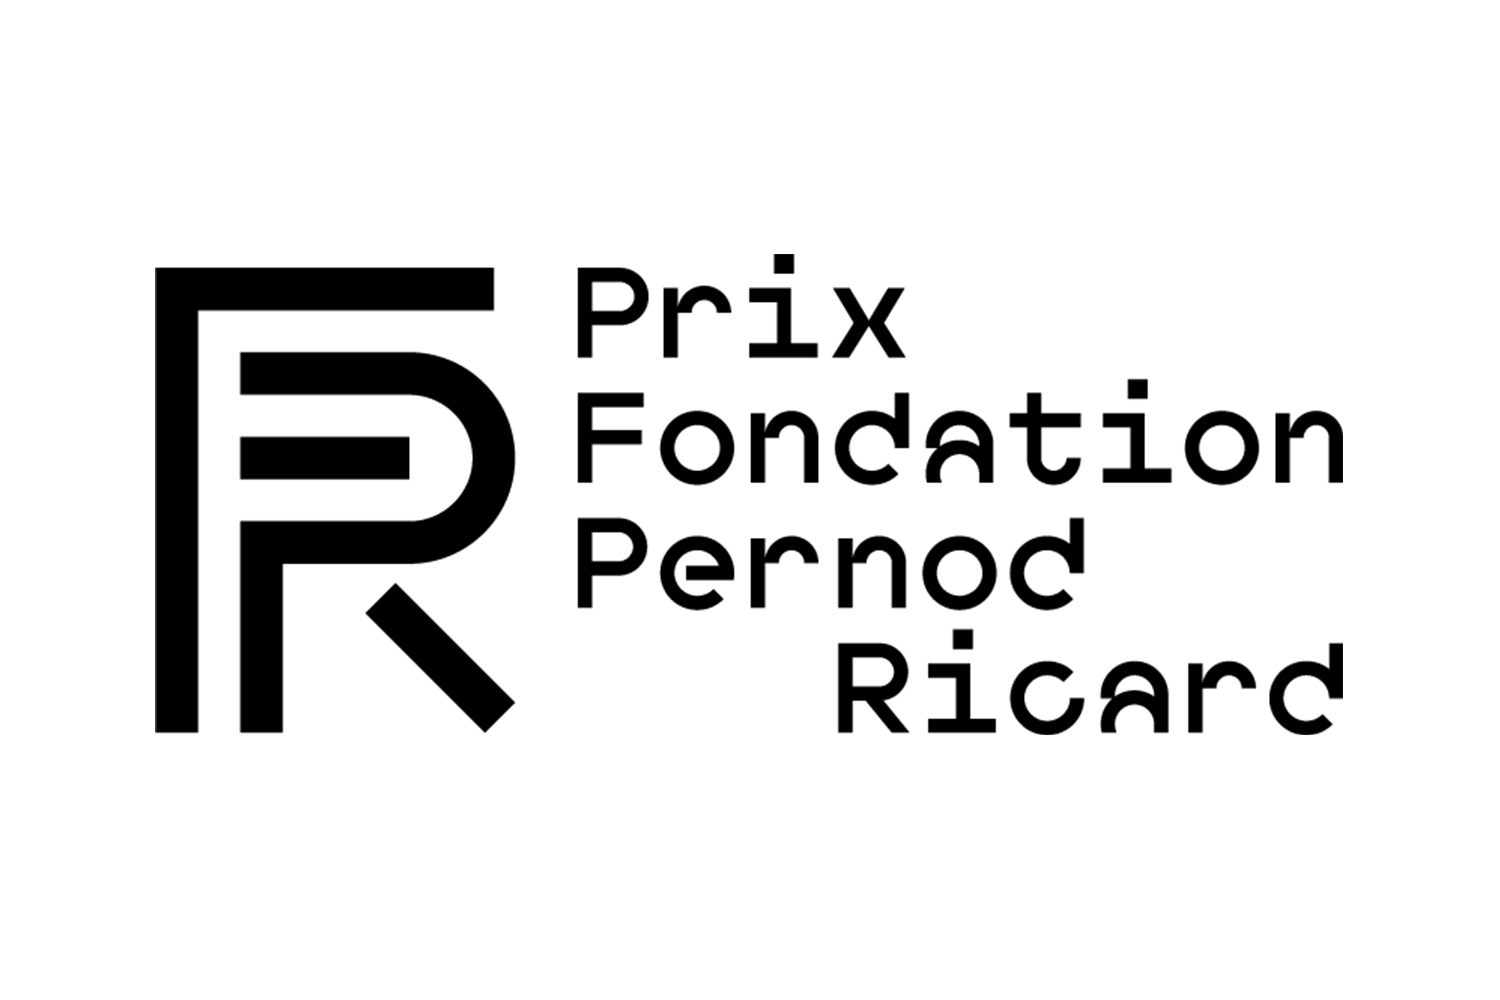 23rd Pernod Ricard Foundation Prize